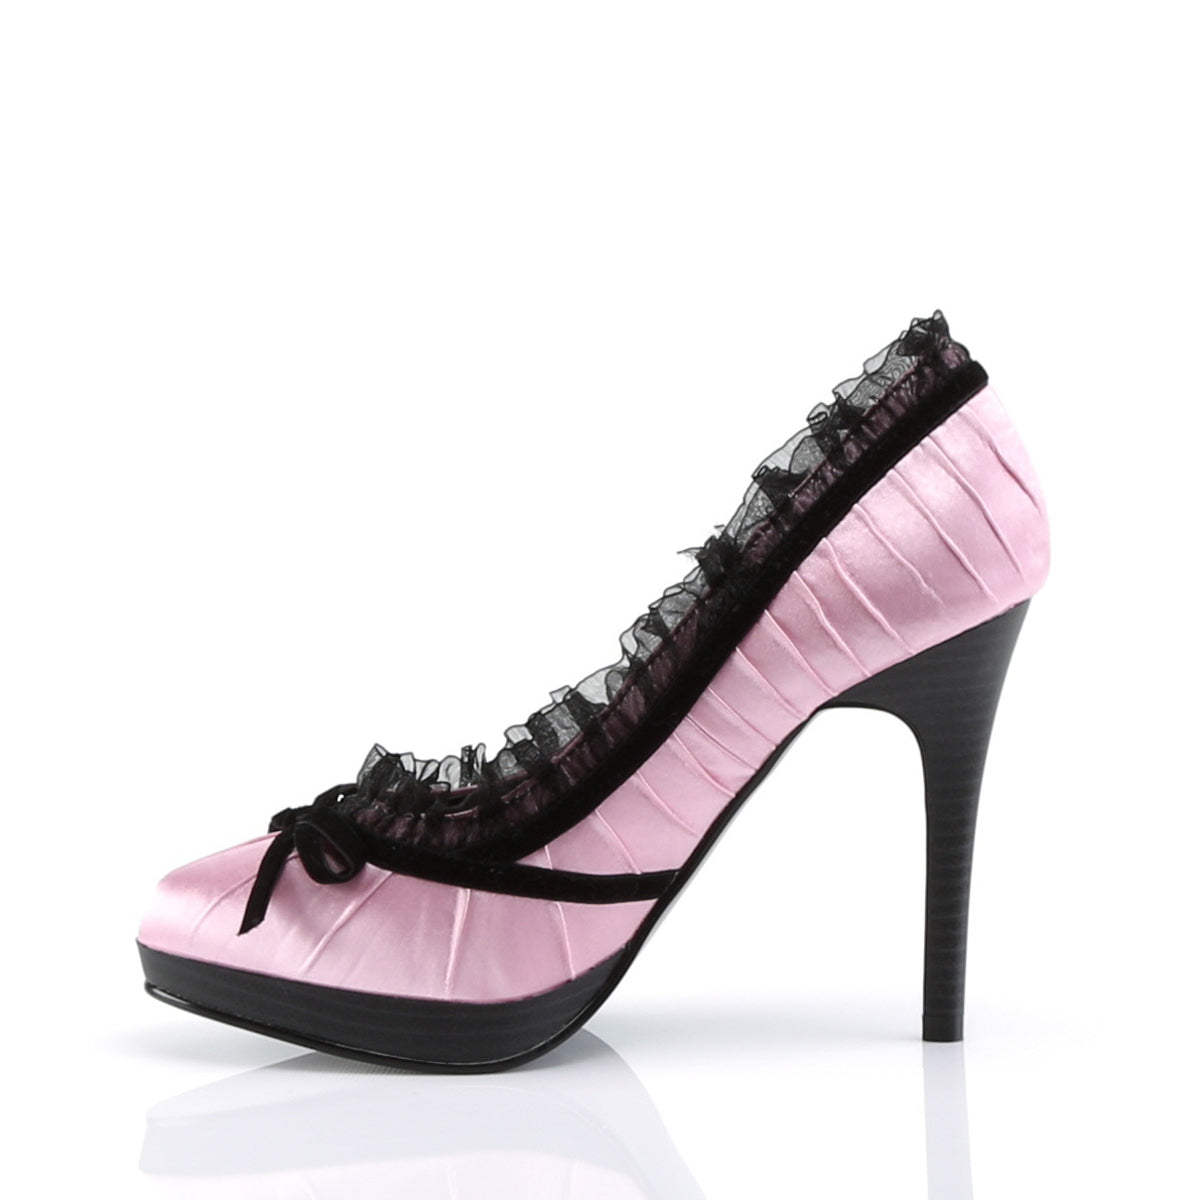 BLISS-38 Retro Glamour Pin Up Couture Platforms Pink-Blk Satin